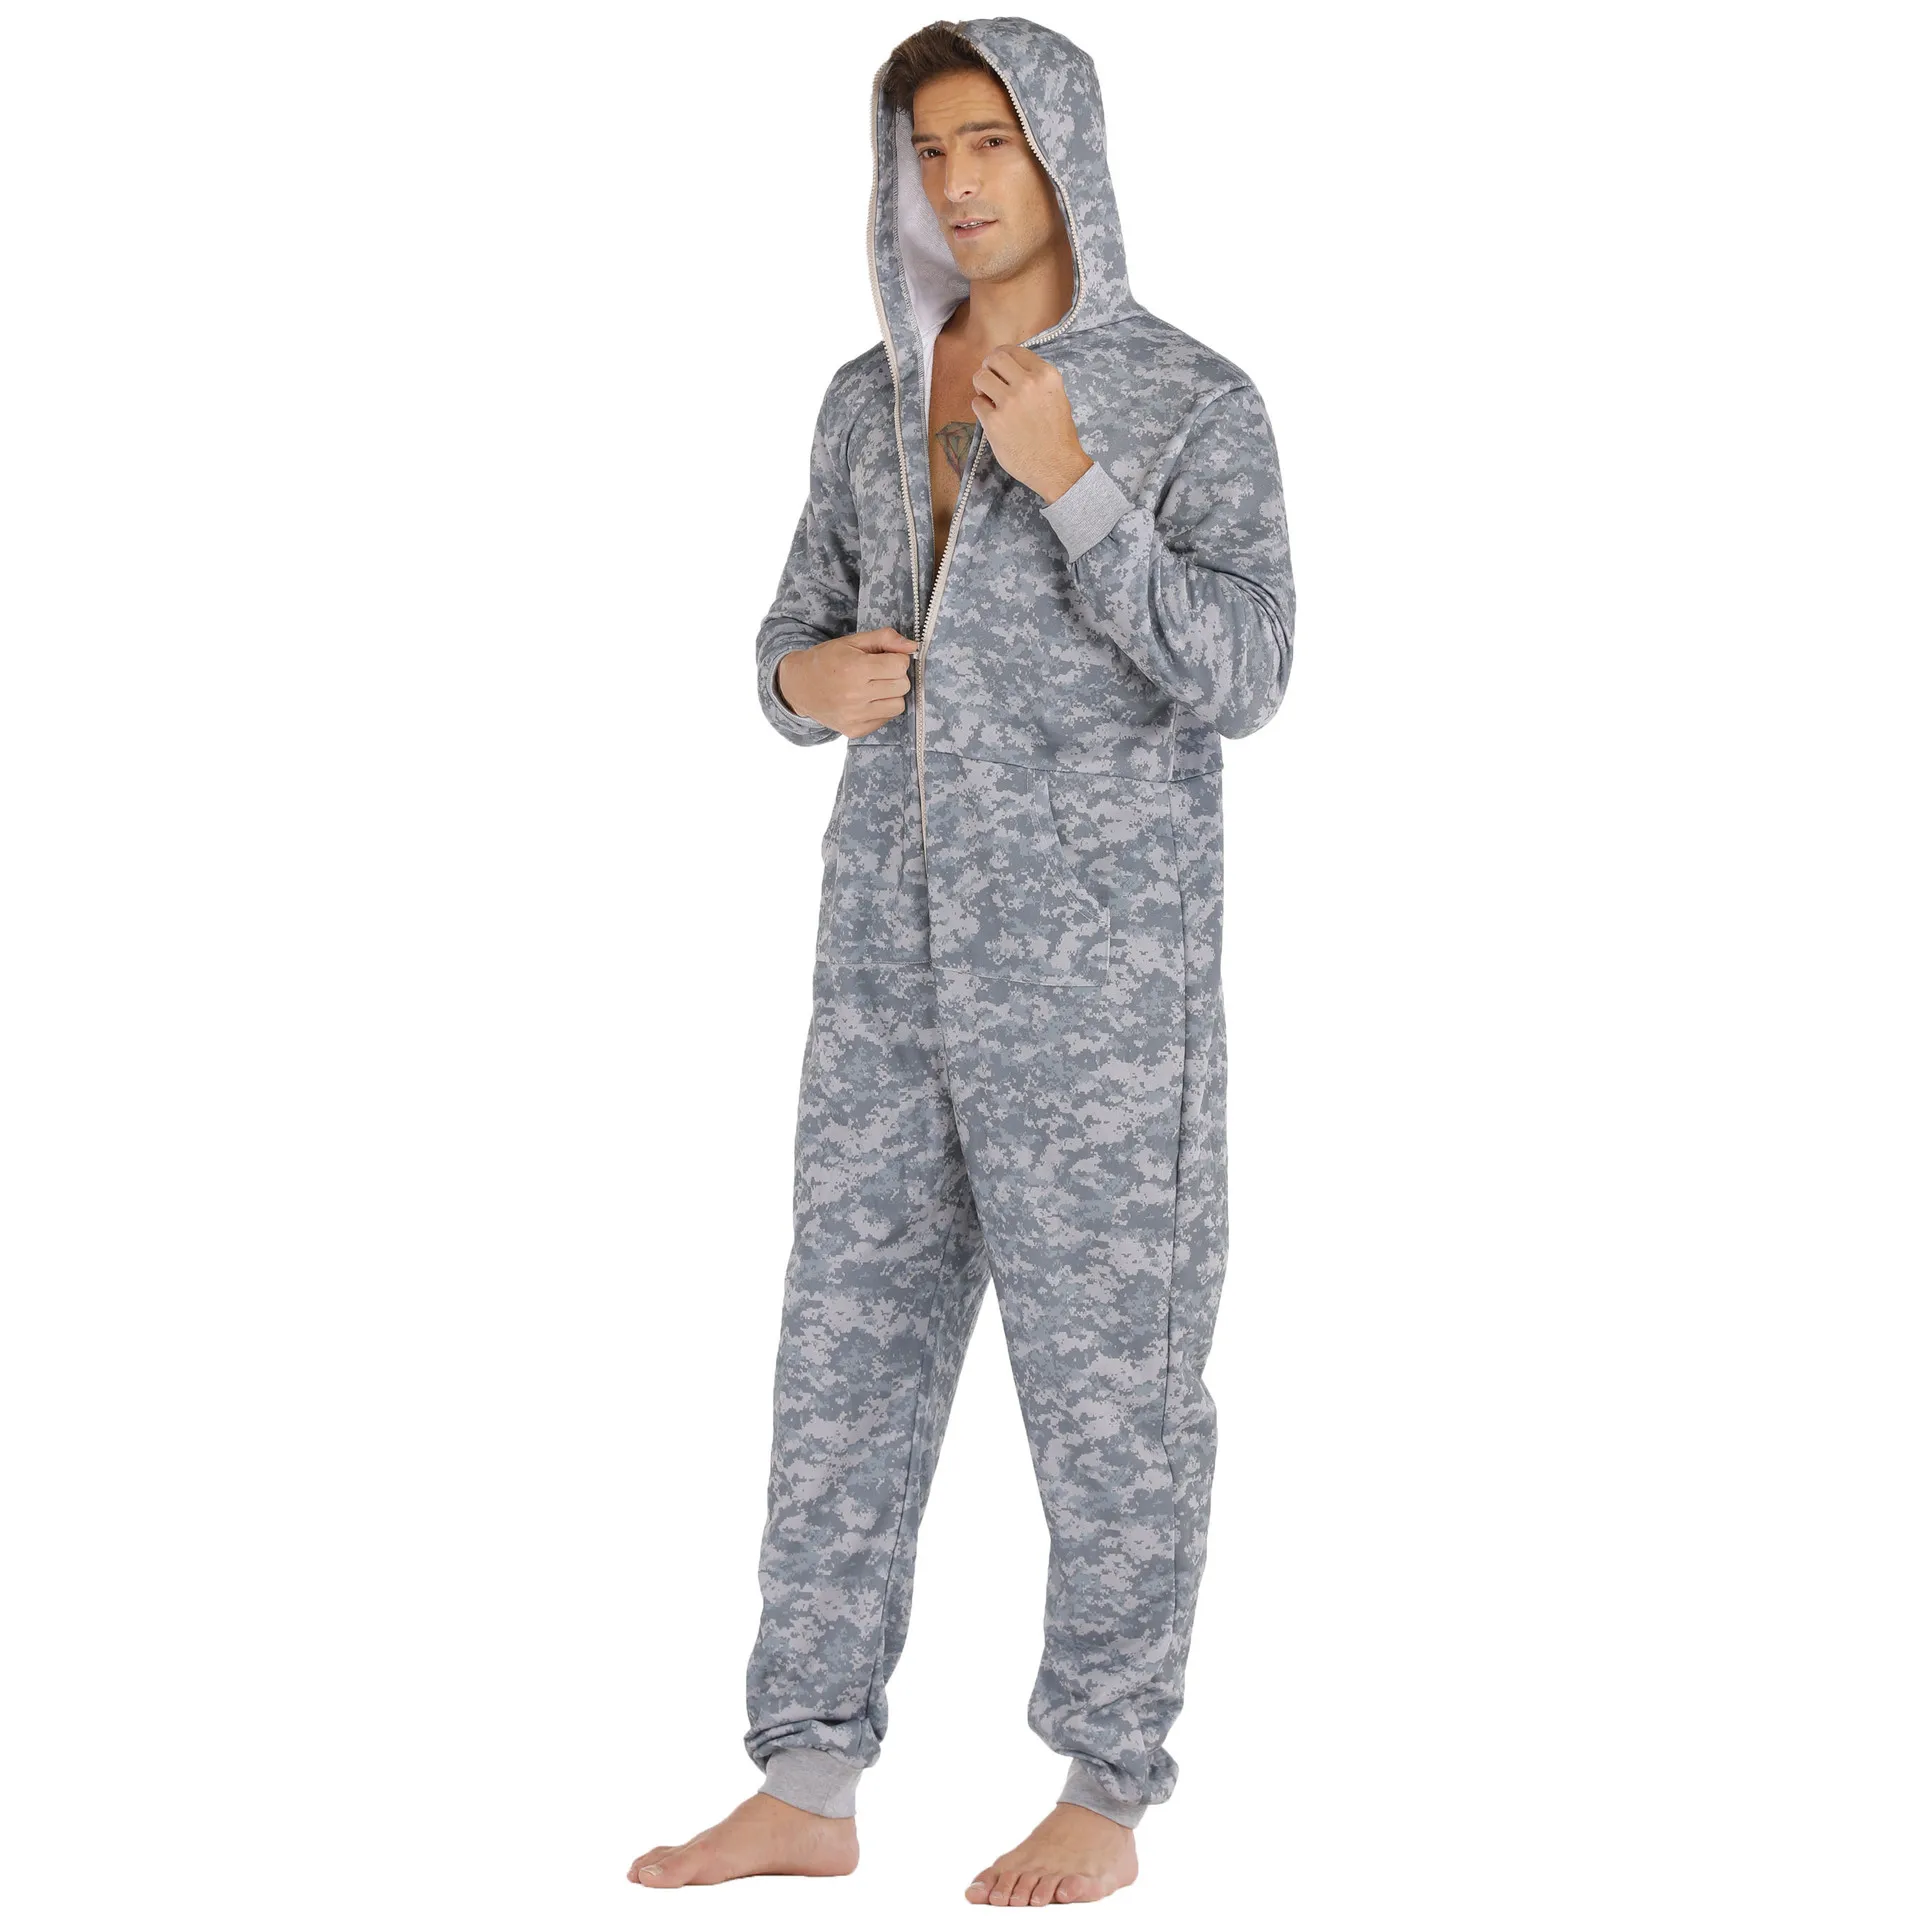 COOFANDY Mens Hooded Jumpsuit Full Zip Onesie Rompers One Piece Overalls Lightweight Tracksuit with Pockets 